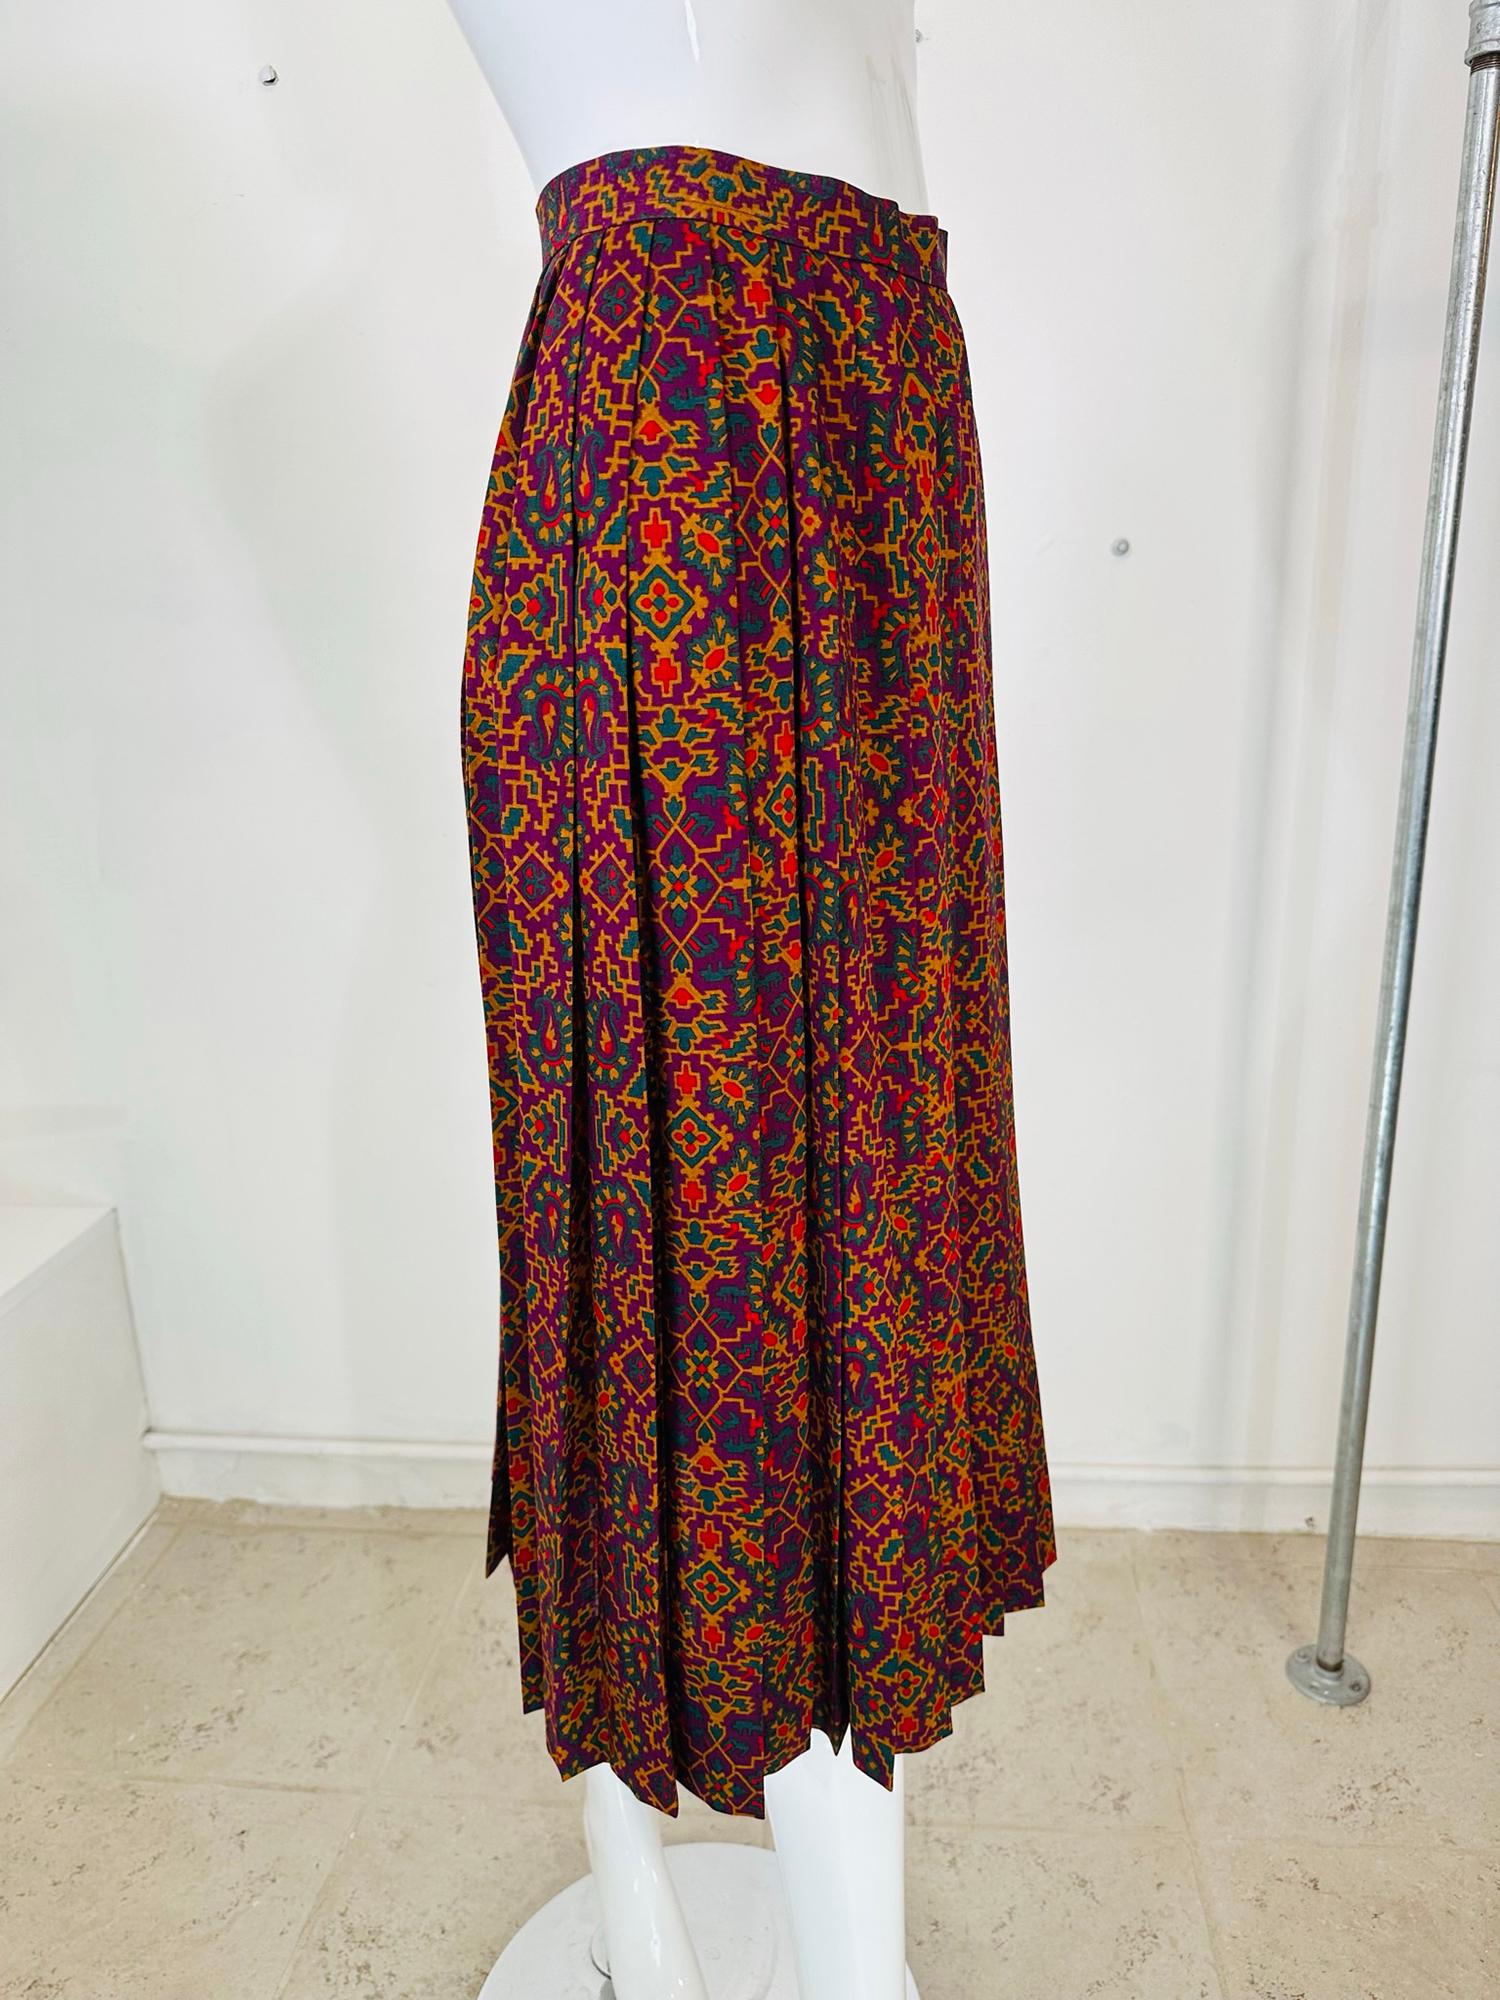 Vintage Yves Saint Laurent YSL Moorish print challis knife pleated skirt 1970s In Good Condition For Sale In West Palm Beach, FL